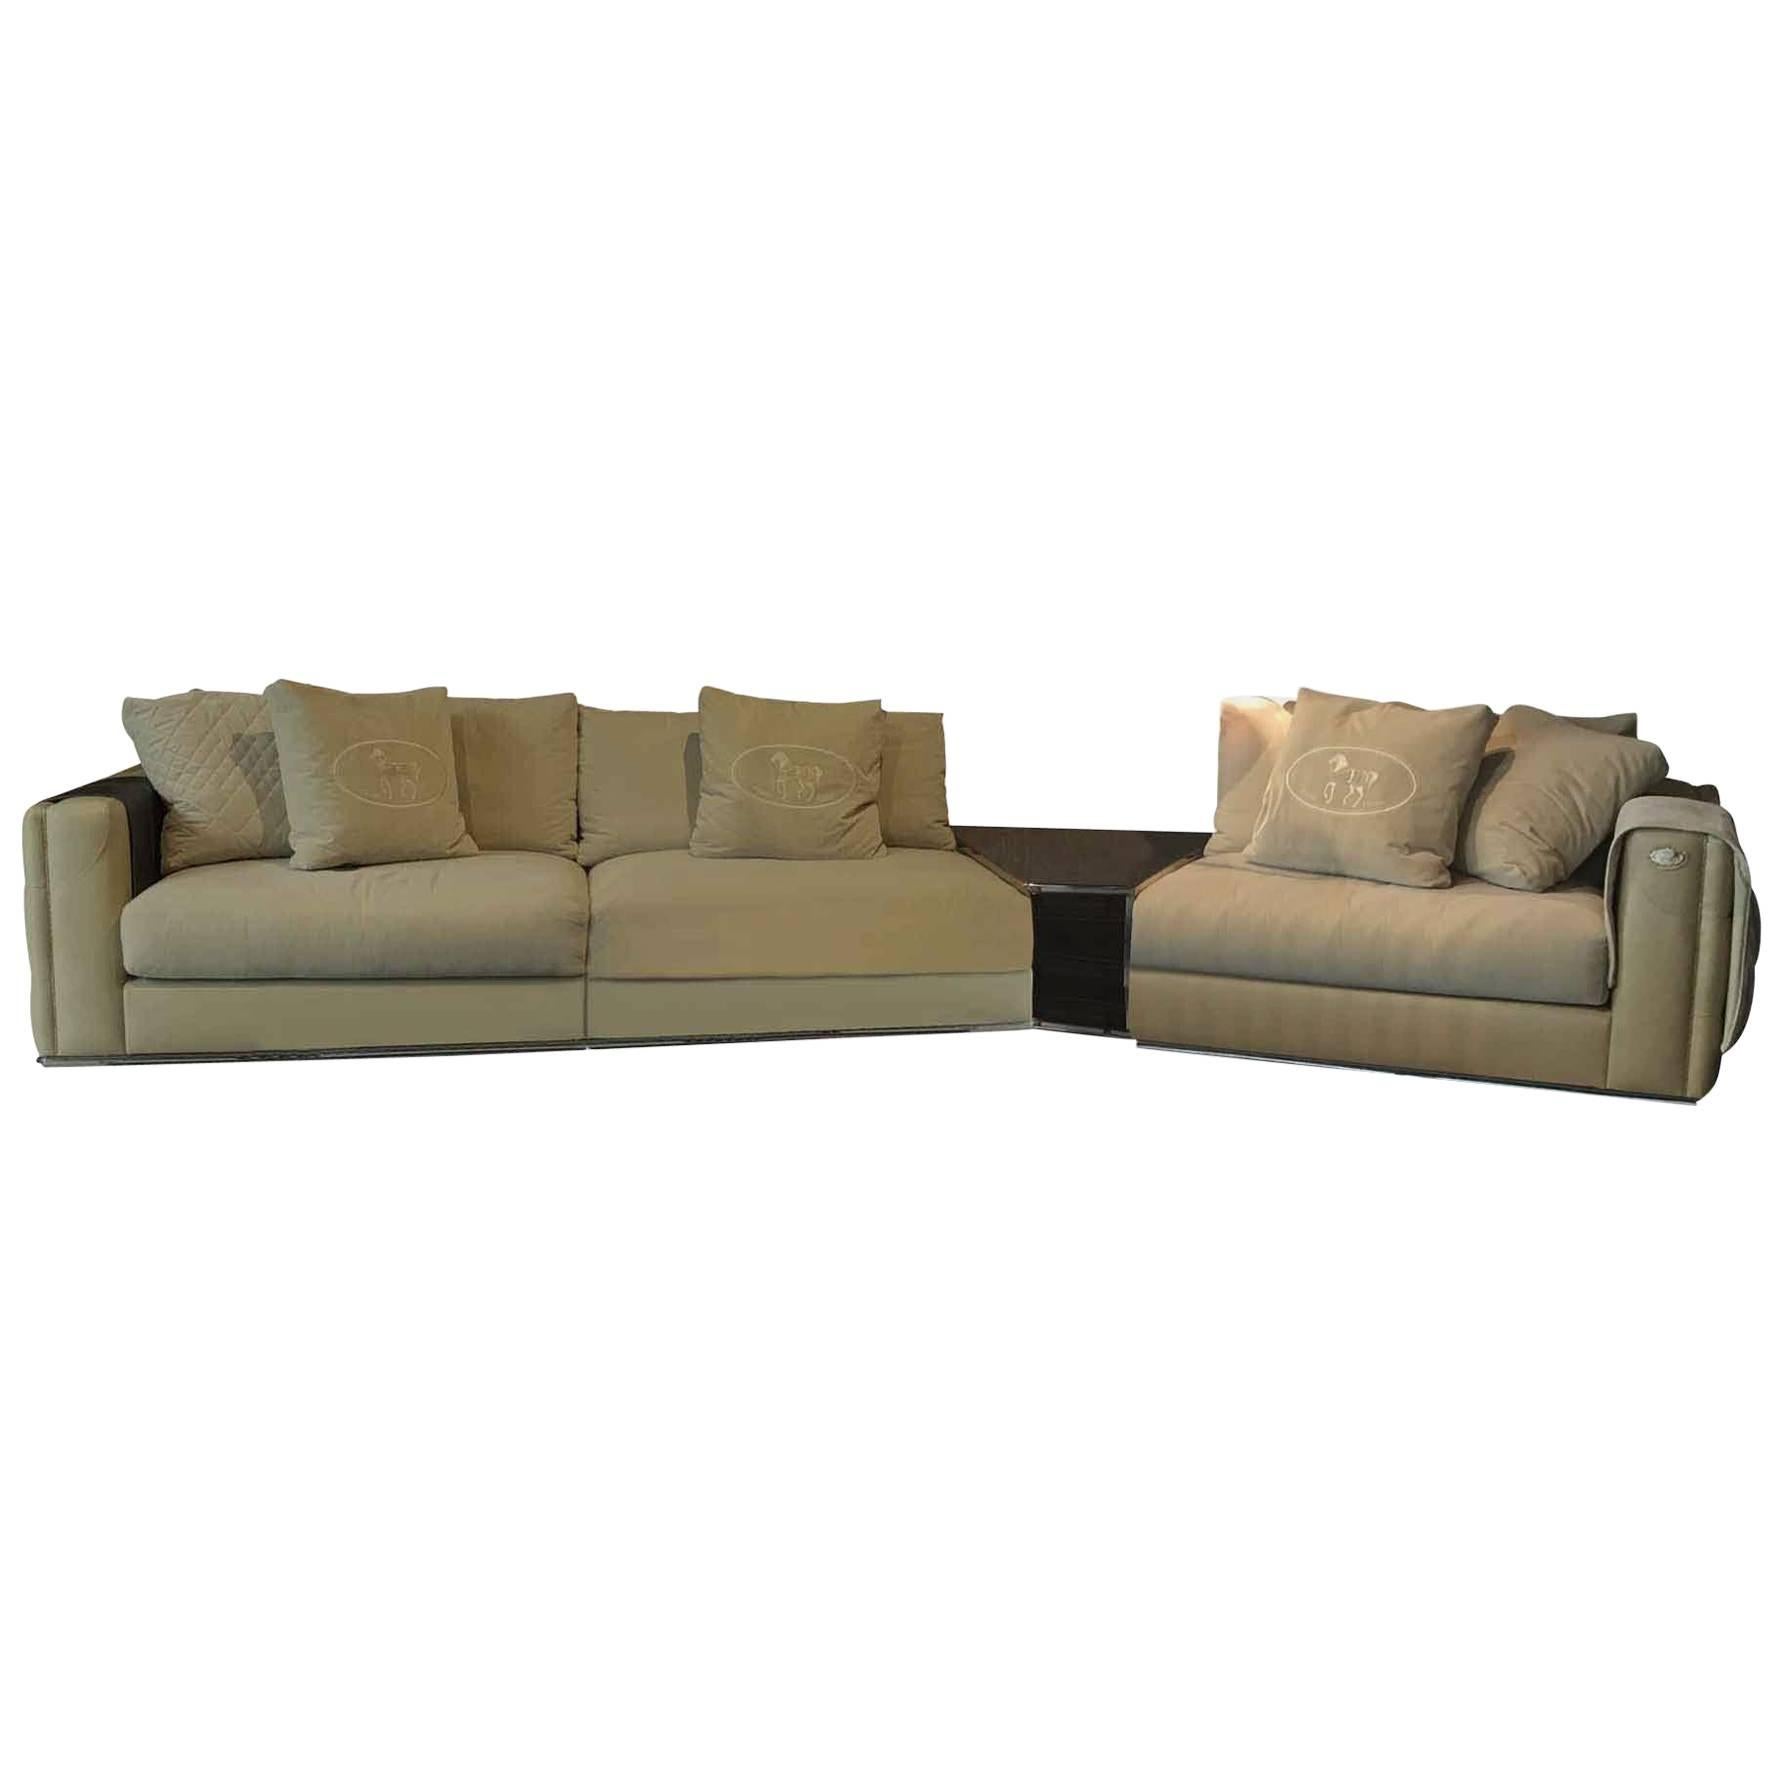 Sofa "Plaza" by Luxury Living Group Fendi Casa Fabric Beige For Sale